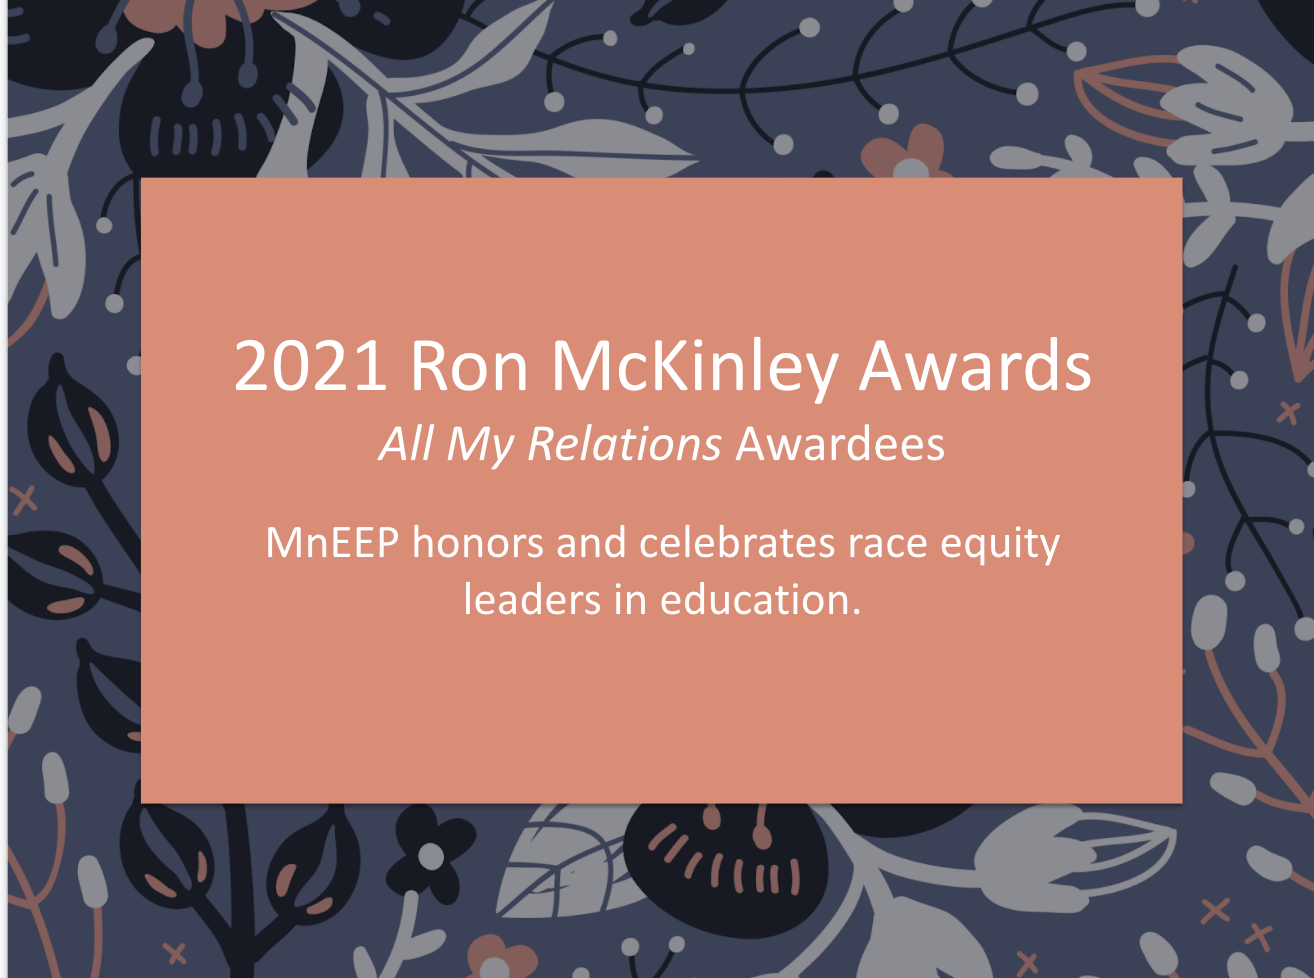 2021 Ron McKinley Awards, All My Relations Awardees, MnEEP honors and celebrates race equity leaders in education